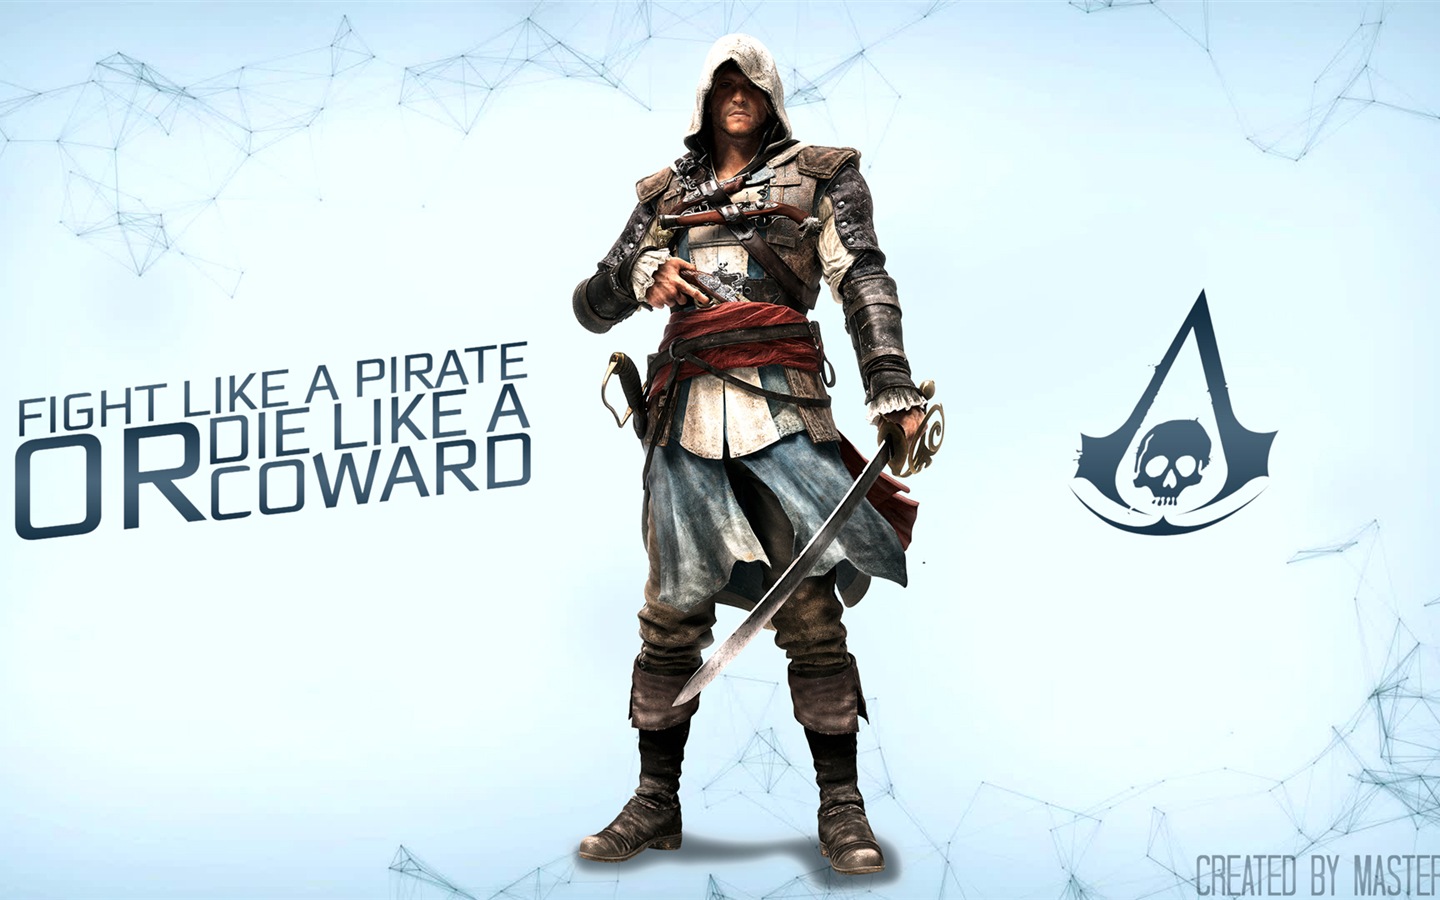 Creed IV Assassin: Black Flag HD wallpapers #3 - 1440x900